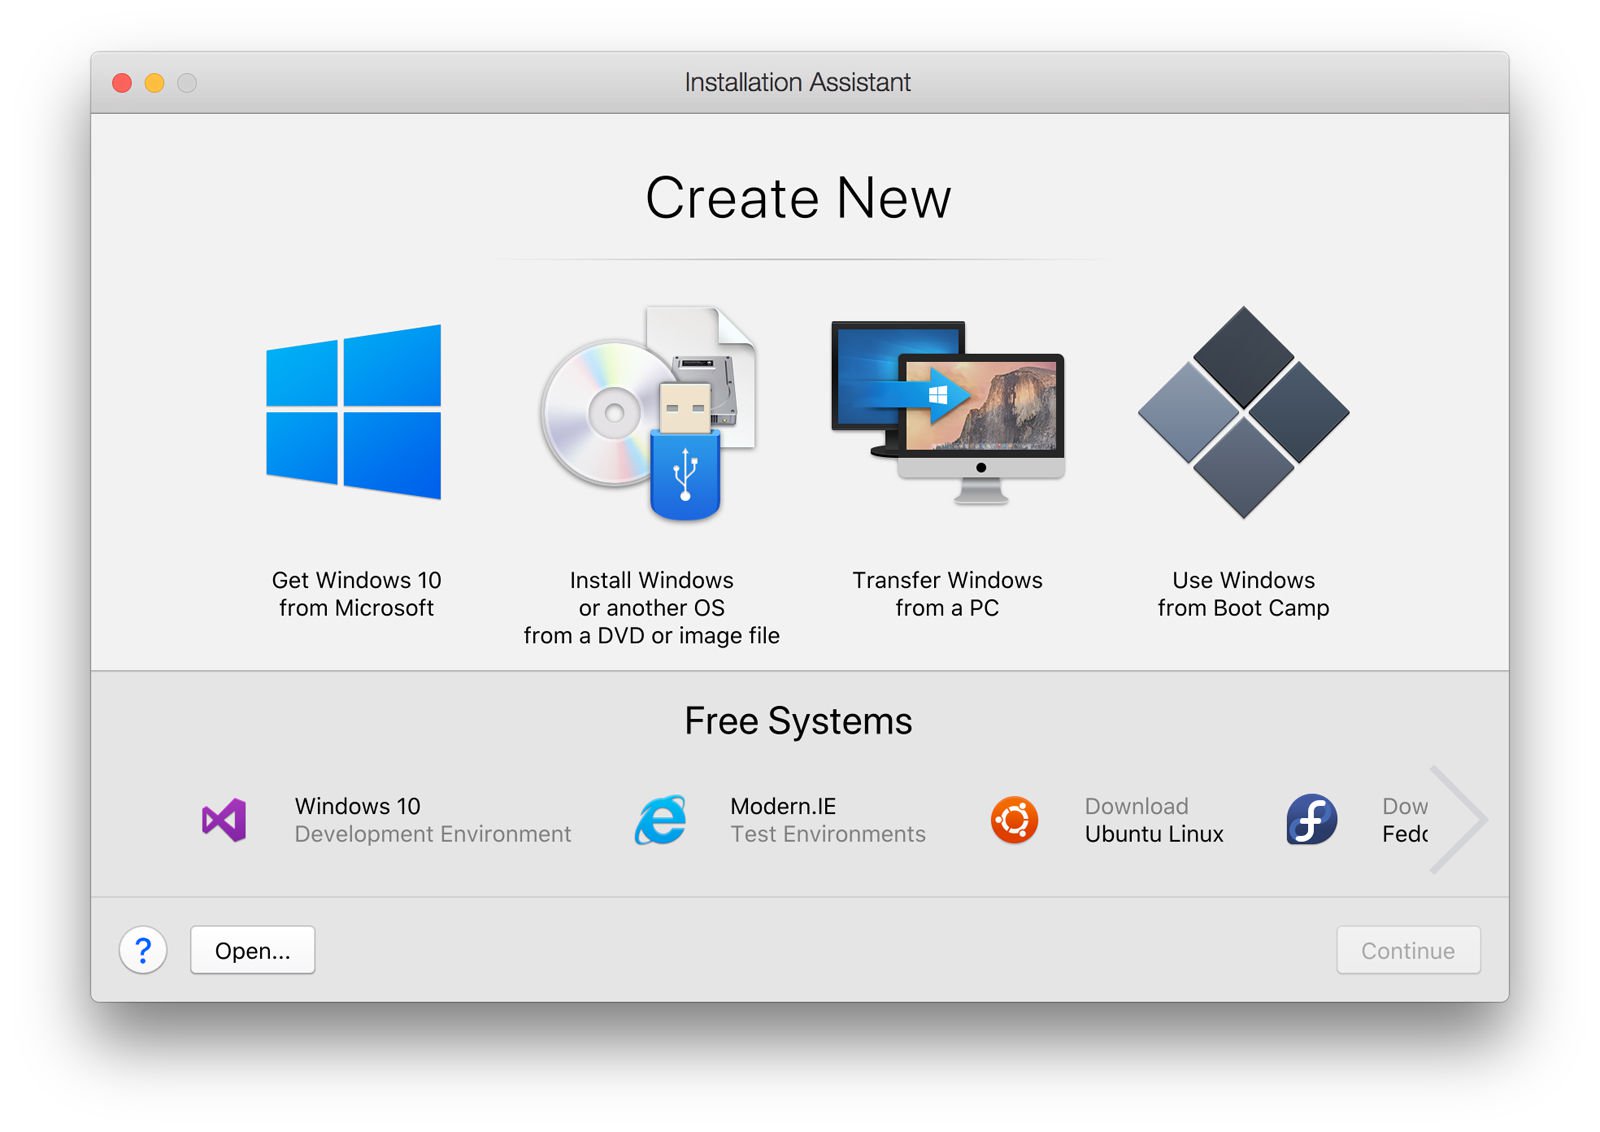 ifunbox for mac os x 10.6.8